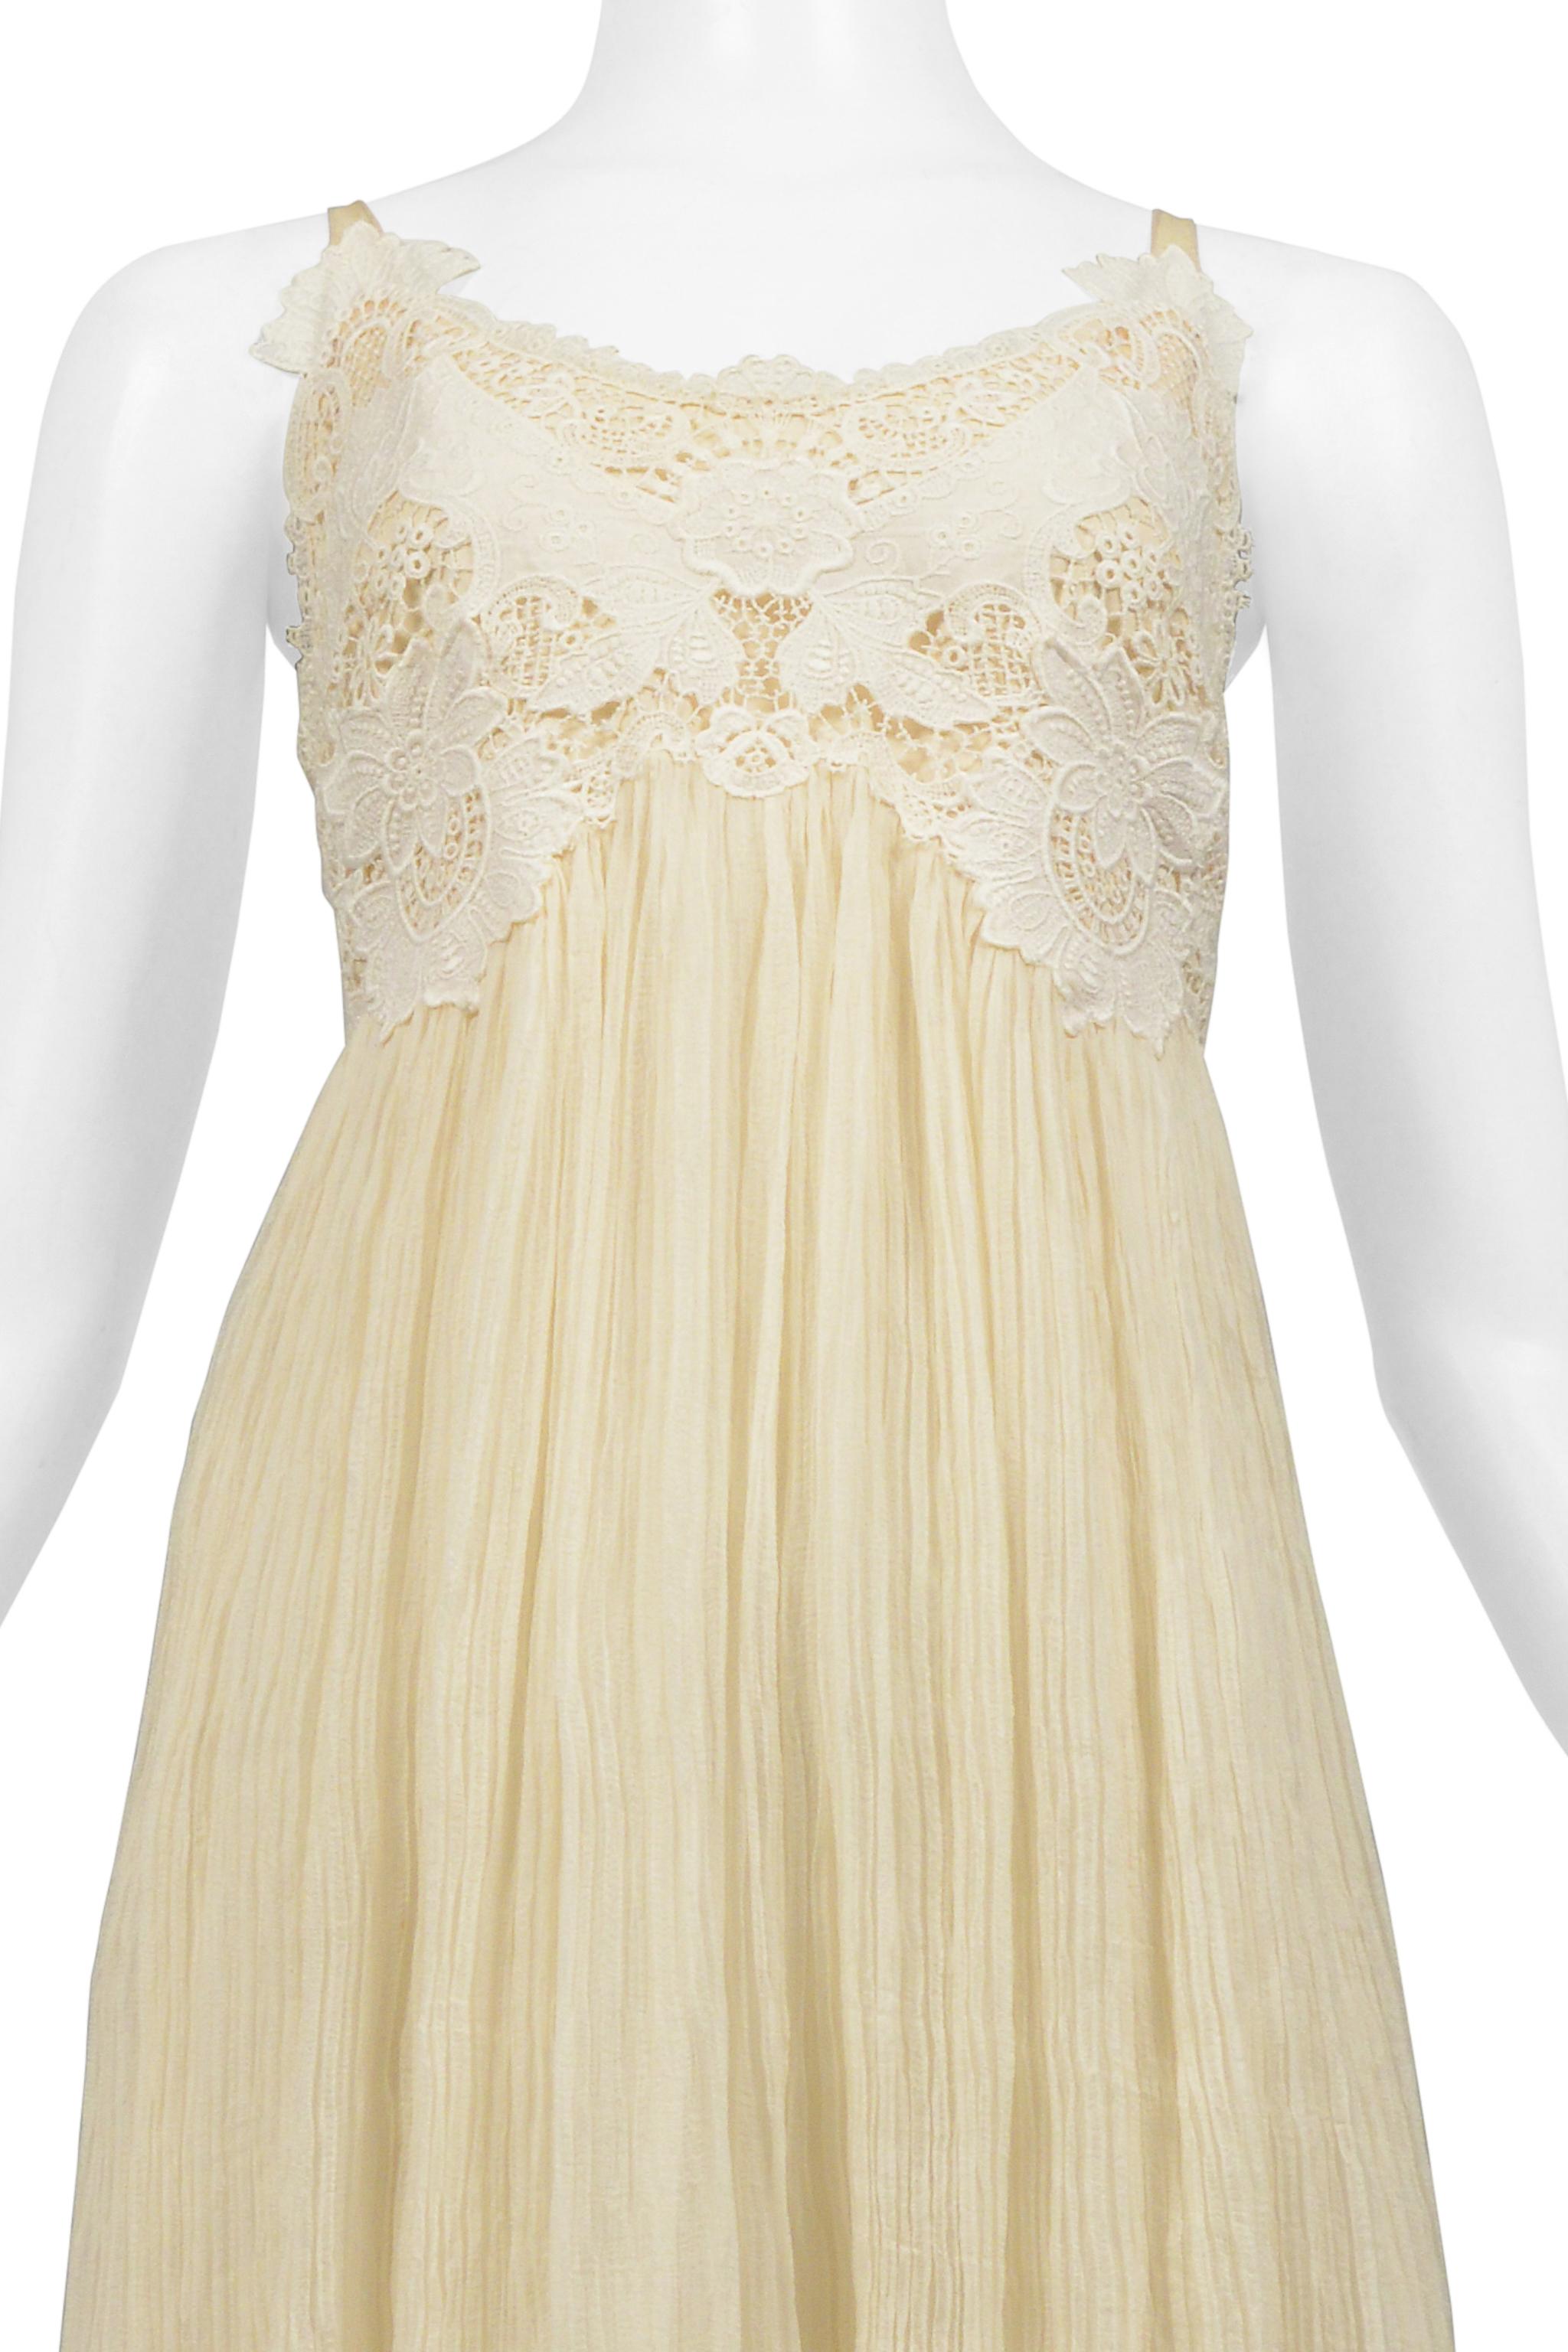 Alexander McQueen Off White Crinkle Dress W Lace Bodice 2005 In Excellent Condition For Sale In Los Angeles, CA